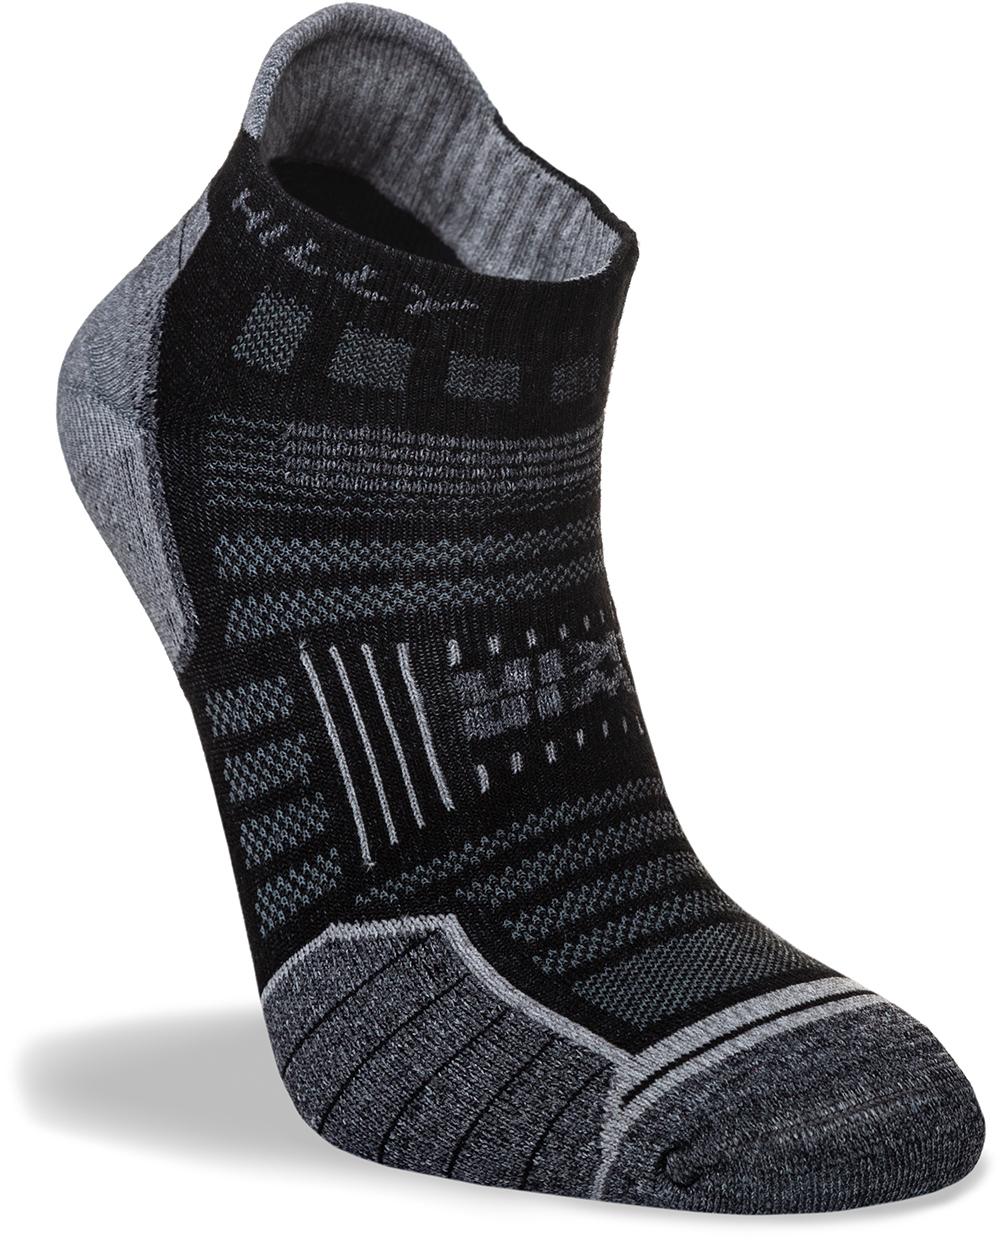 Image of Chaussettes basses Hilly Twin Skin - Black/Grey Marl